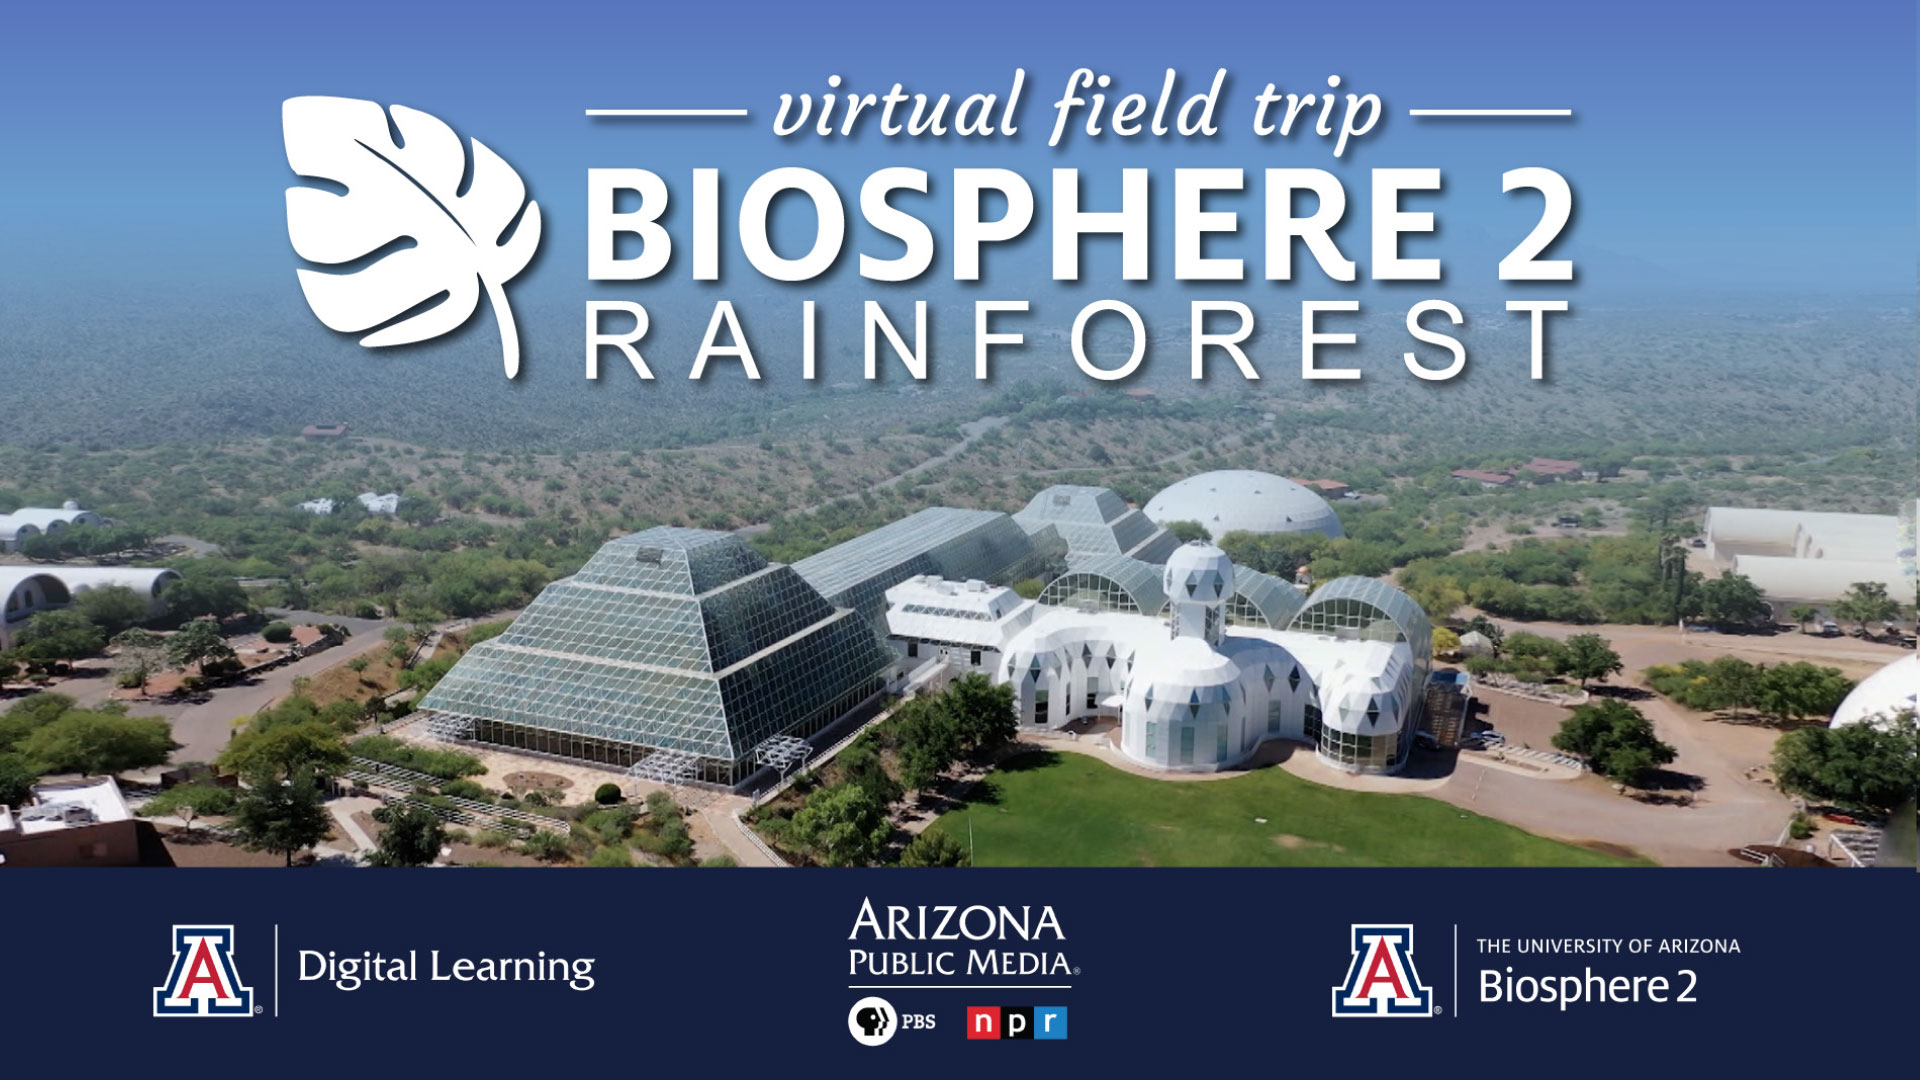 The Biosphere 2 Virtual Field Trip was made possible through collaboration between Arizona Public Media, Biosphere 2, and UA Digital Learning.